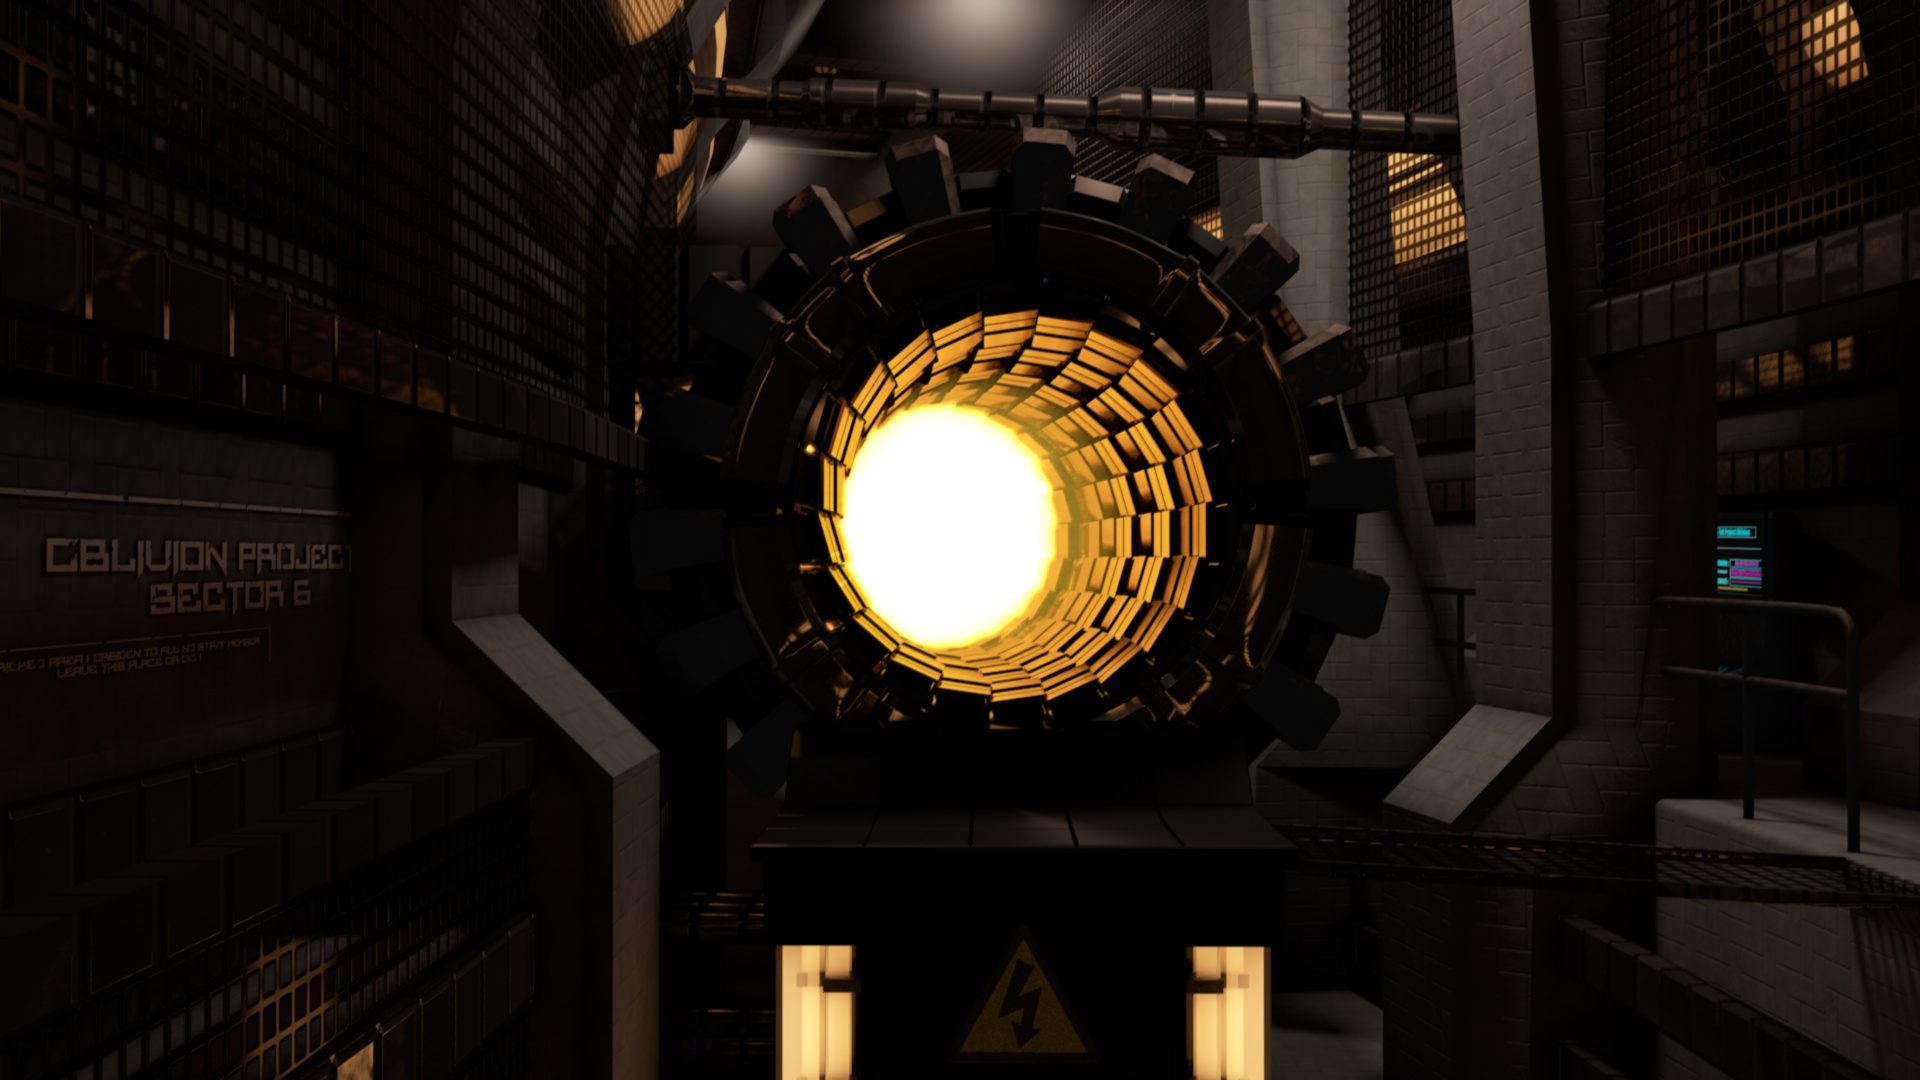 gate_to_a_new_world_wip_6__by_frenchdeathdesign-d89c171.jpg